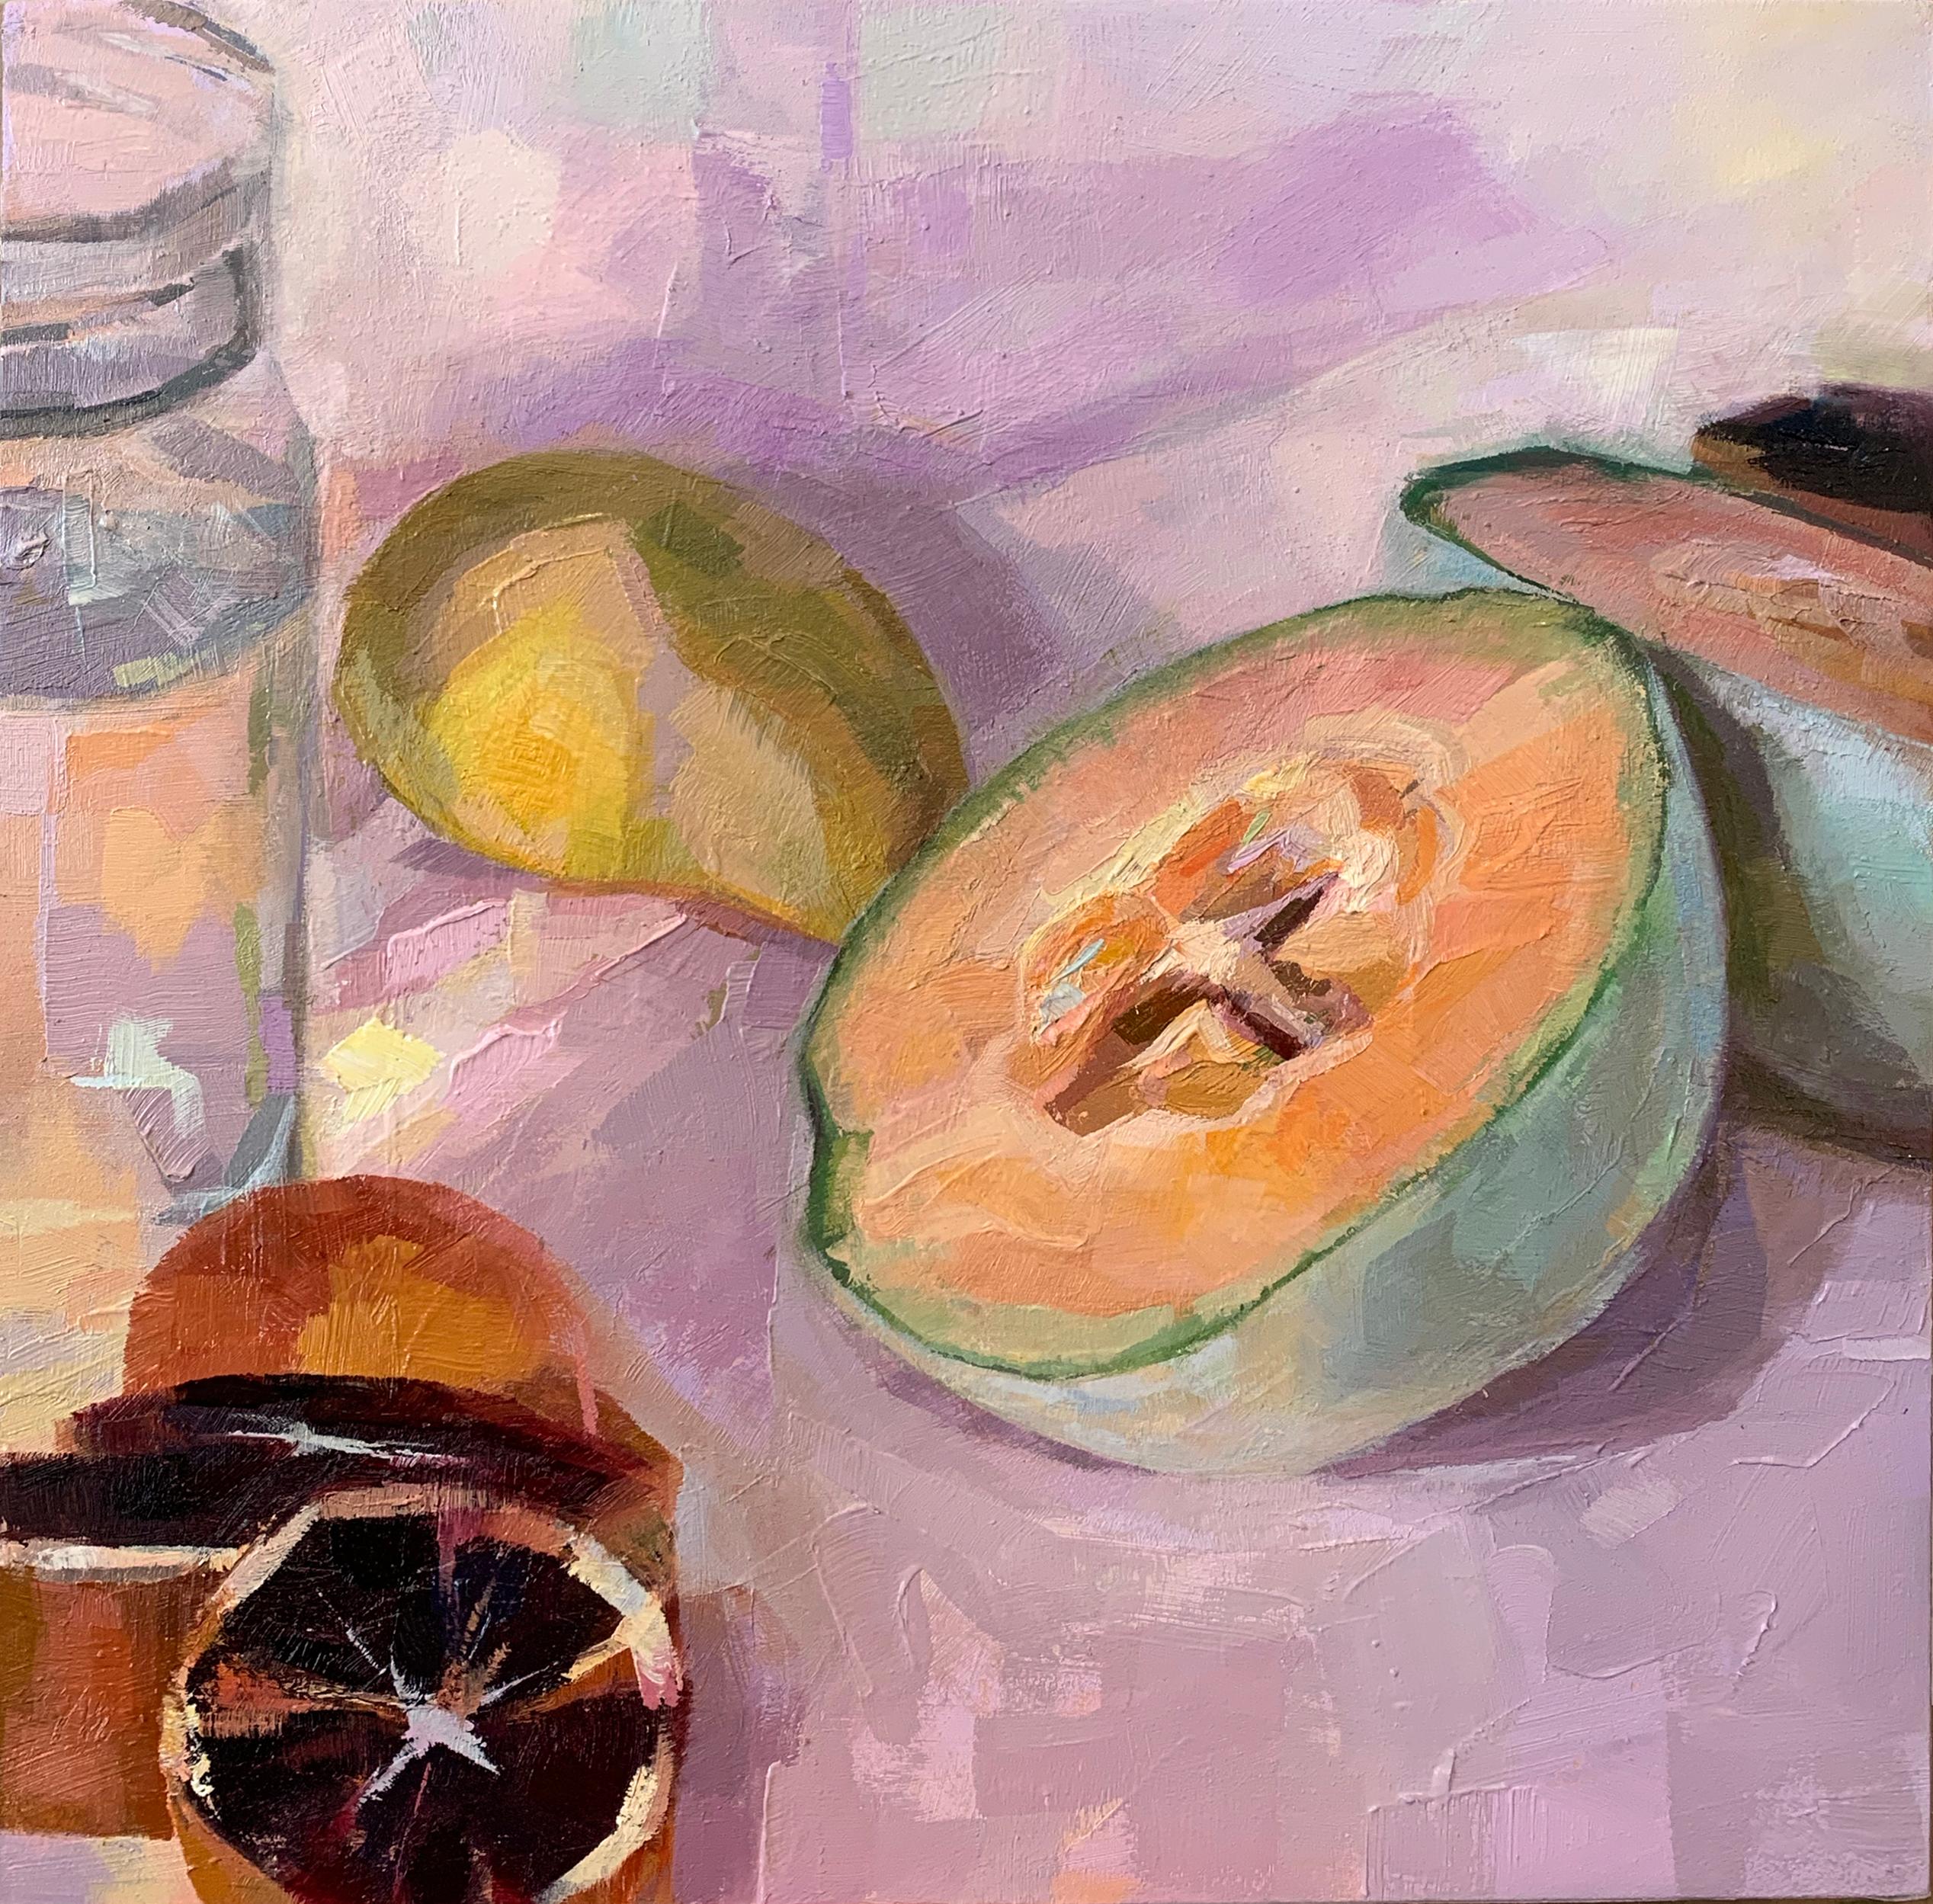 "Cantaloupe", Oil painting